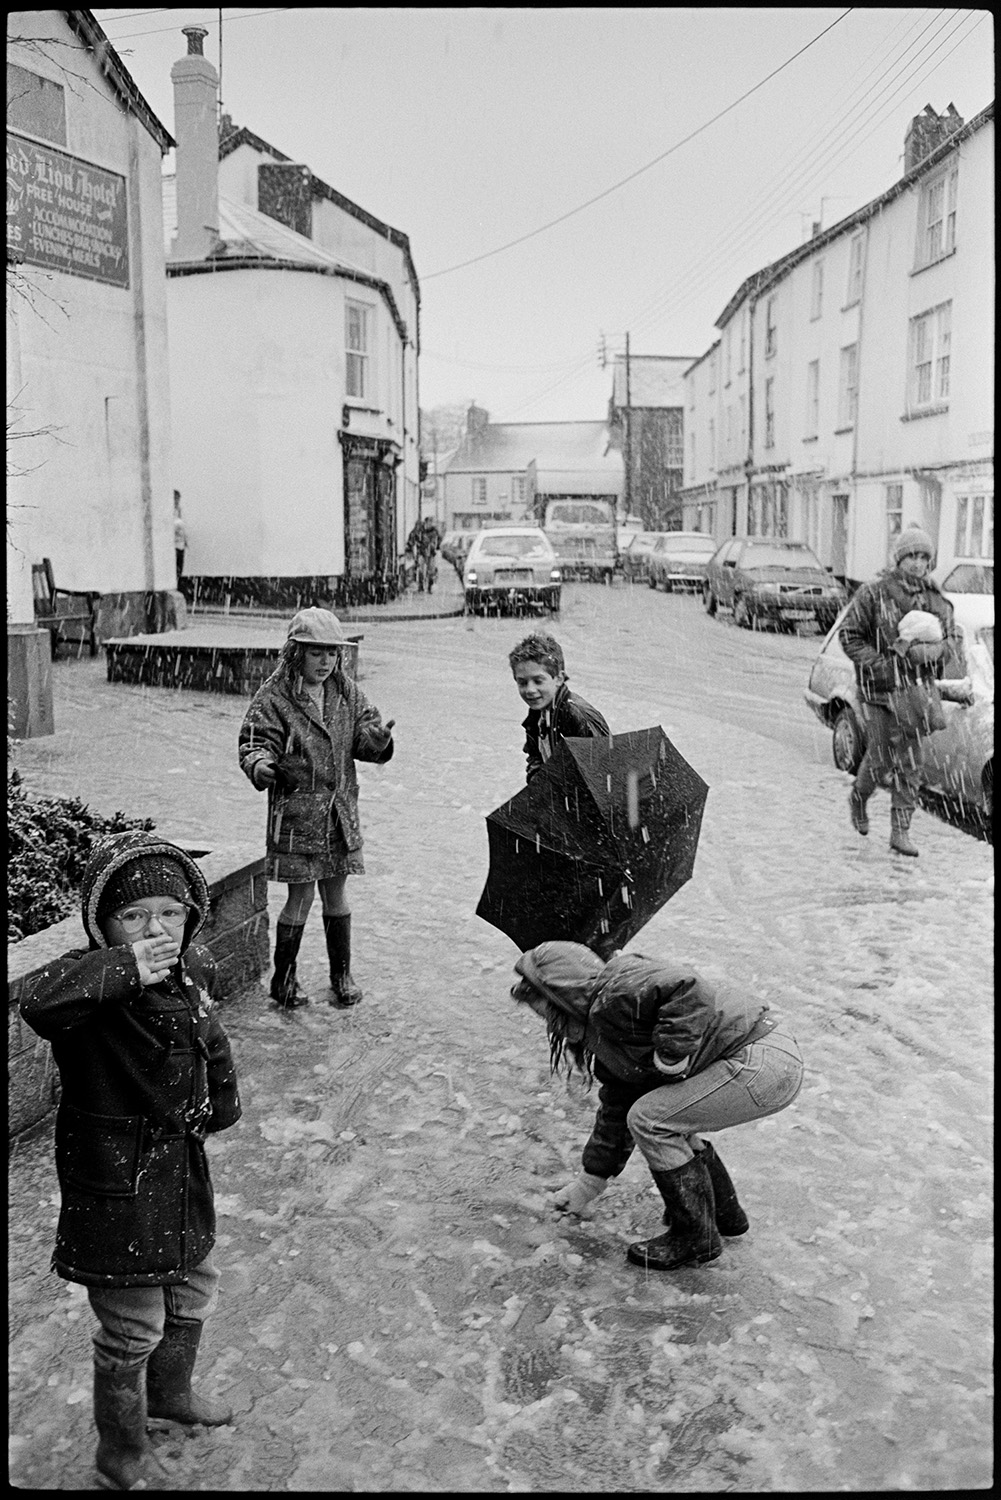 Snow, street scenes with people coming out of coffee morning. 
[Children playing in the snow in Fore Street, Chulmleigh outside the Red Lion Hotel. One of the children has an umbrella. Parked cars can be seen along the street in the background and snow is falling.]